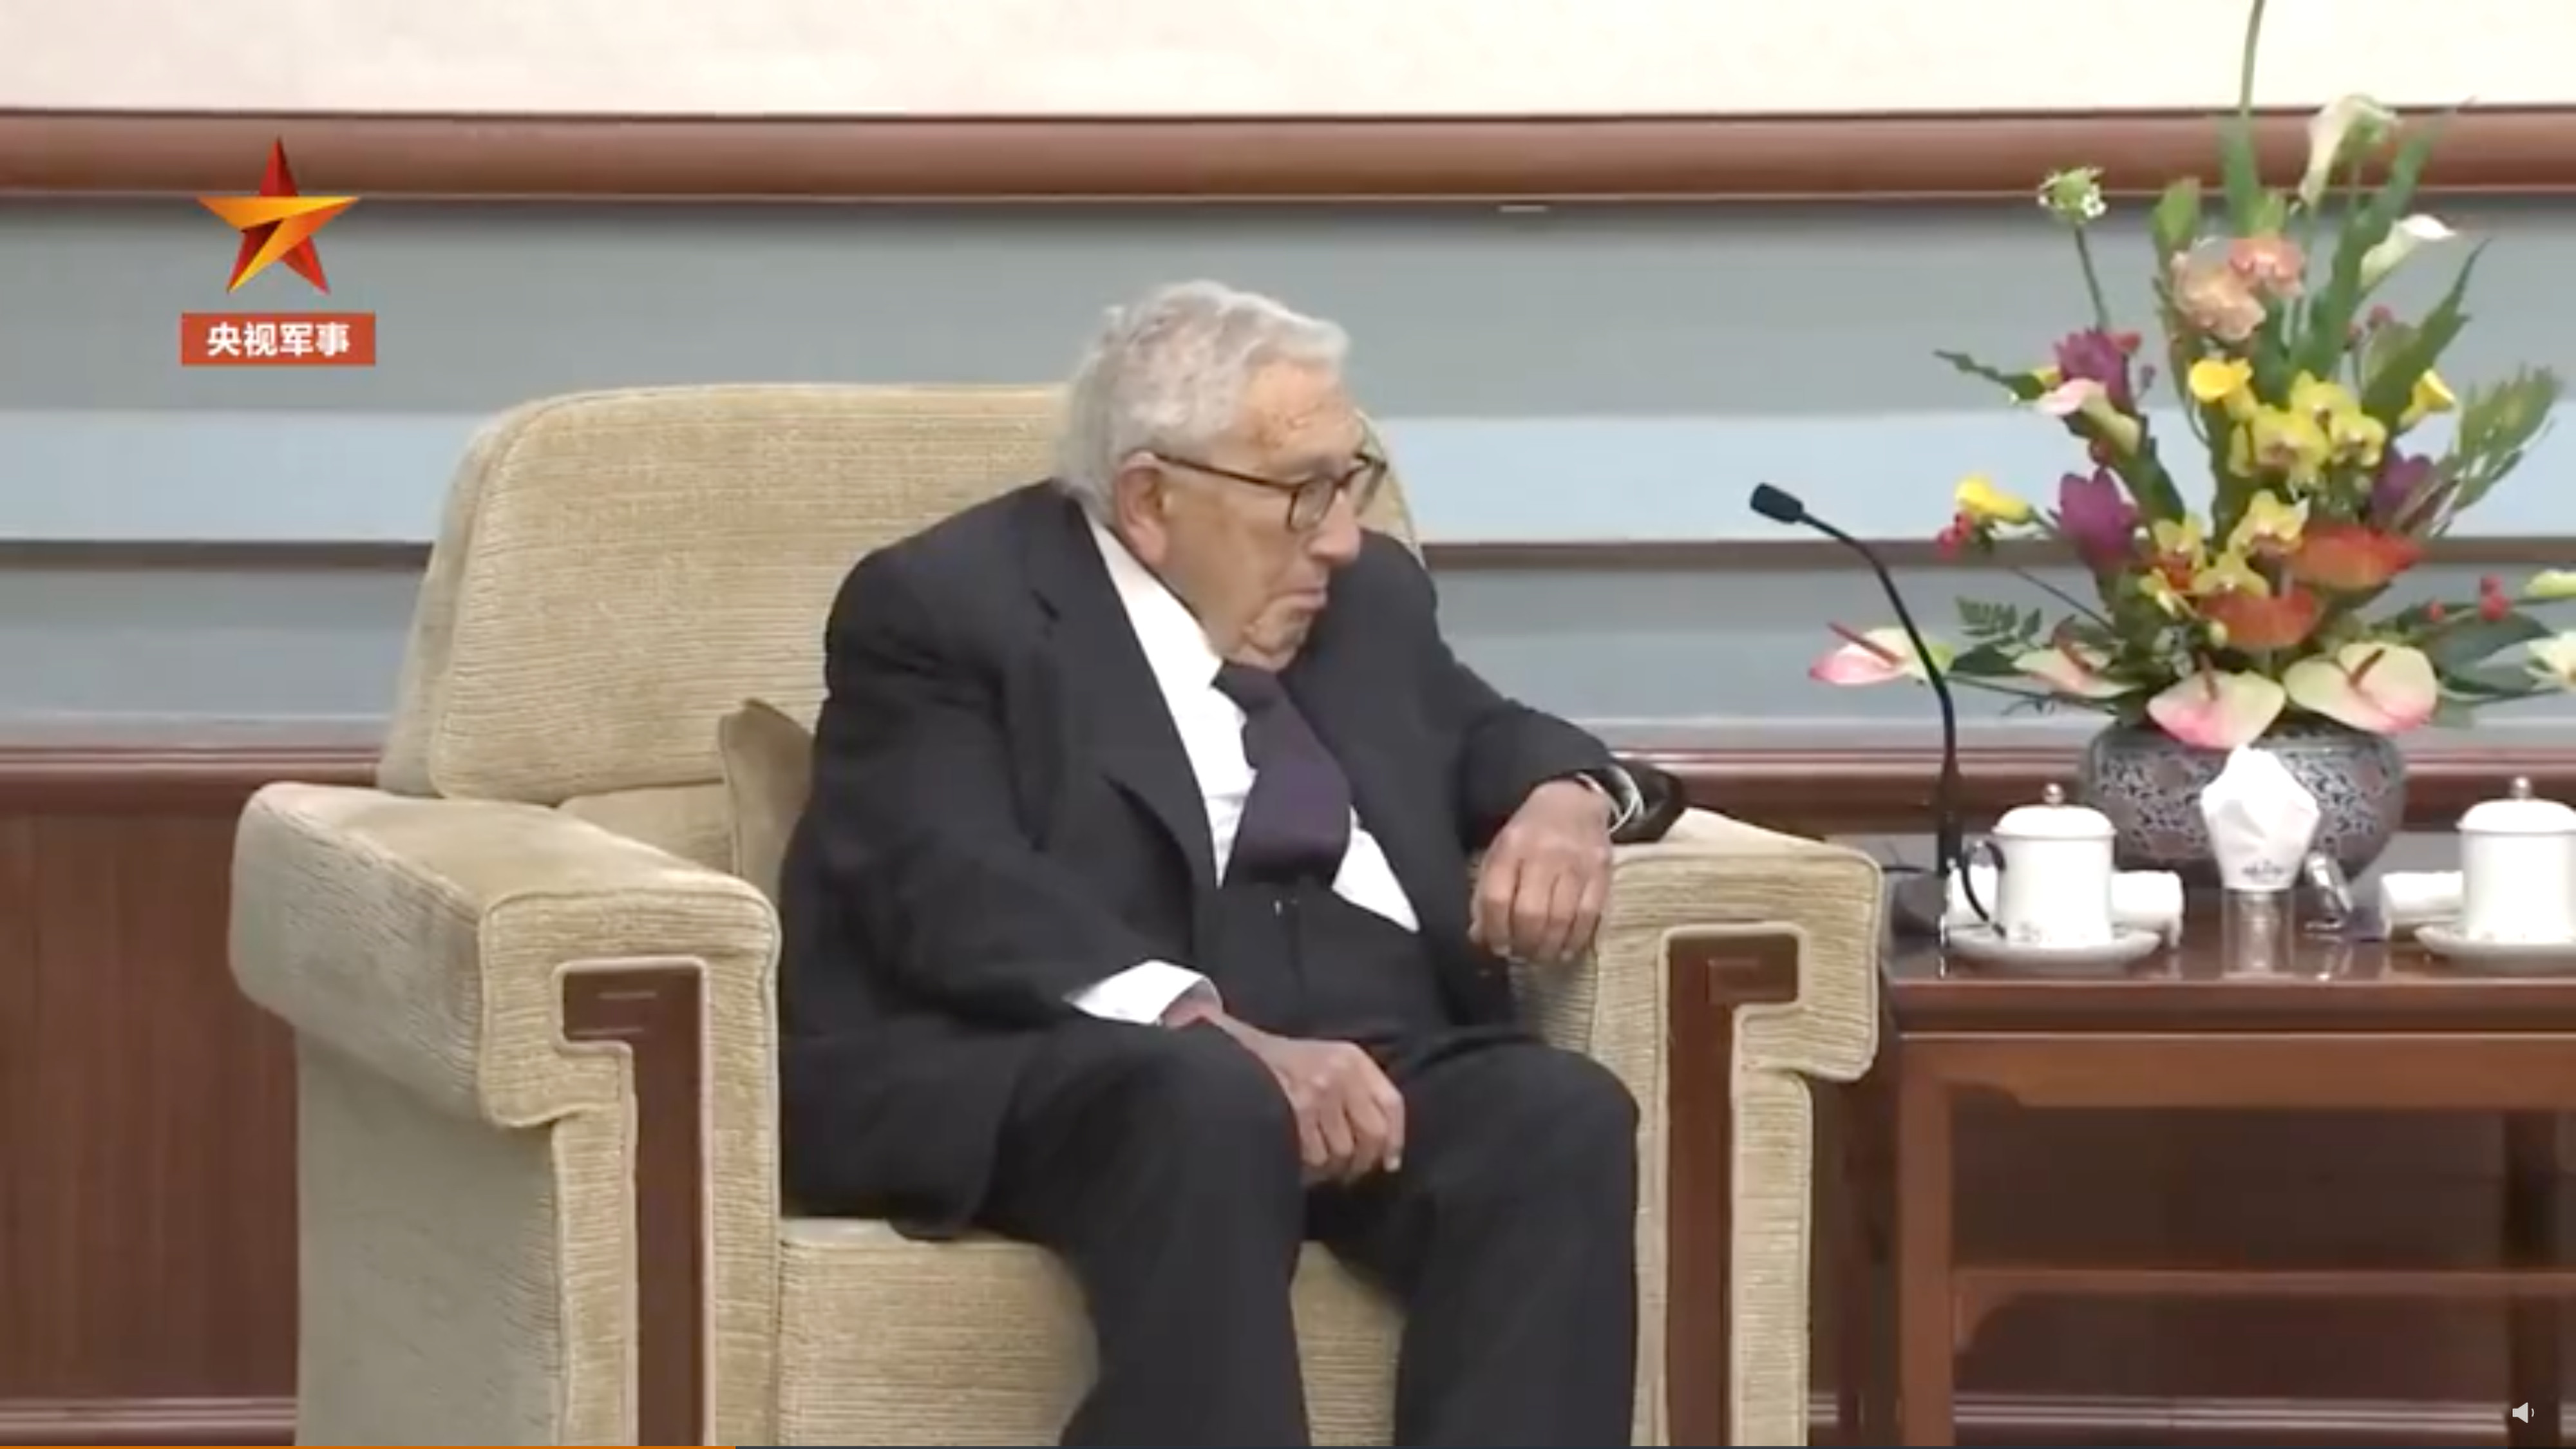 Henry Kissinger said he was visiting “as a friend of China”. Photo: Weibo